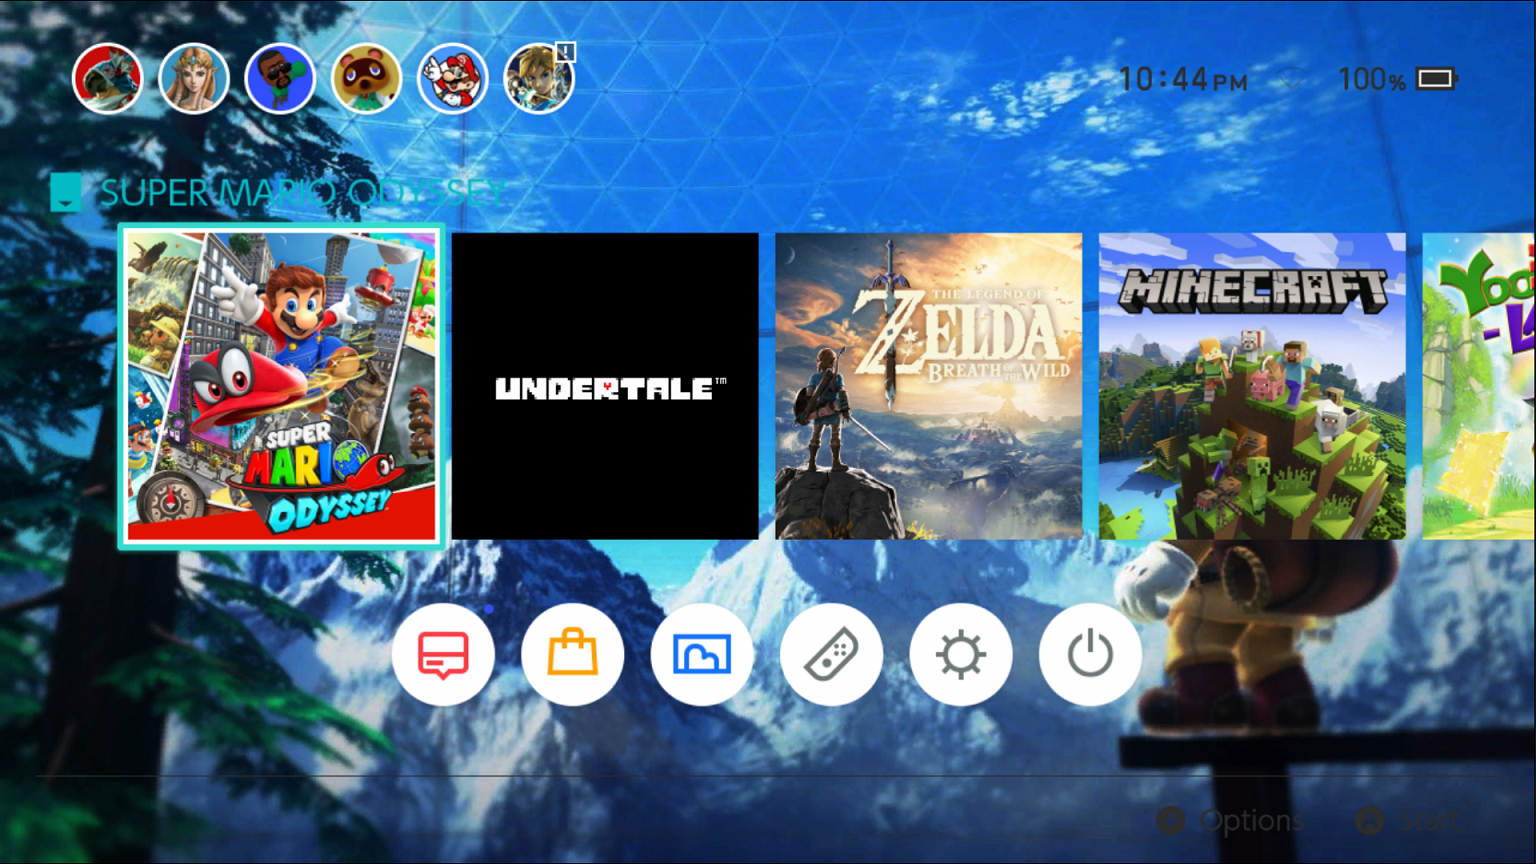 Custom themes arrive on Switch via homebrew | GBAtemp.net - The Independent  Video Game Community